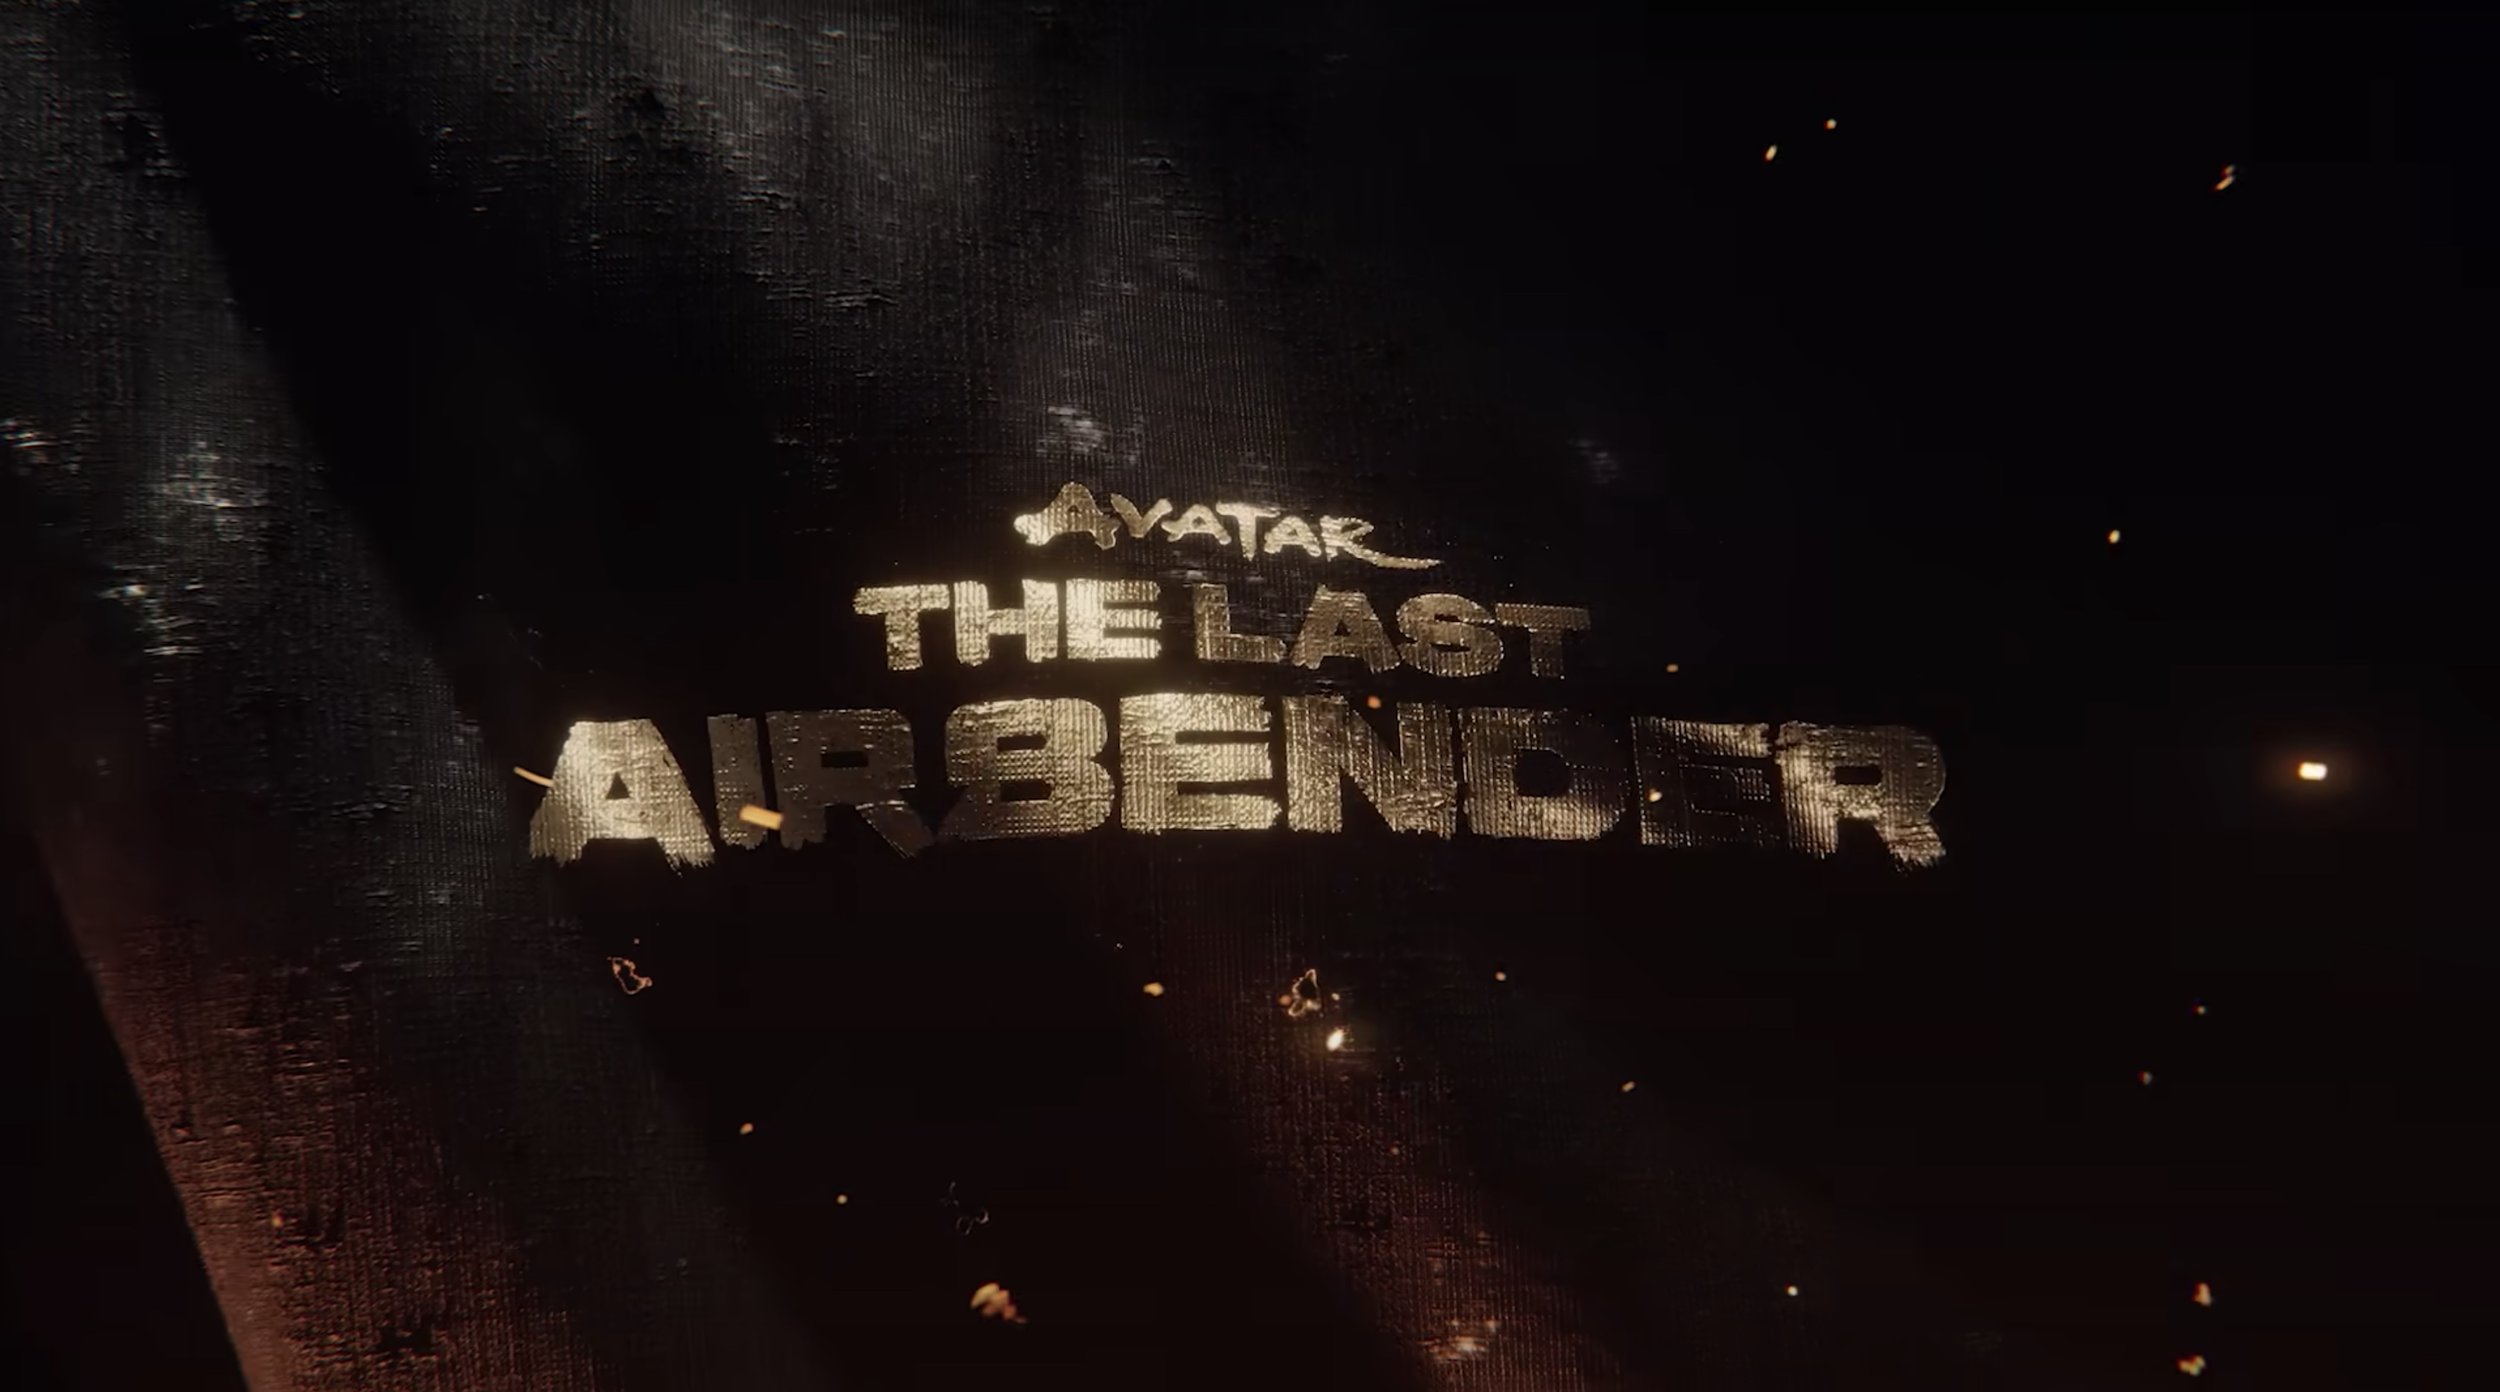 Avatar The Last Airbender Quest for Balance  Official Reveal Trailer   YouTube